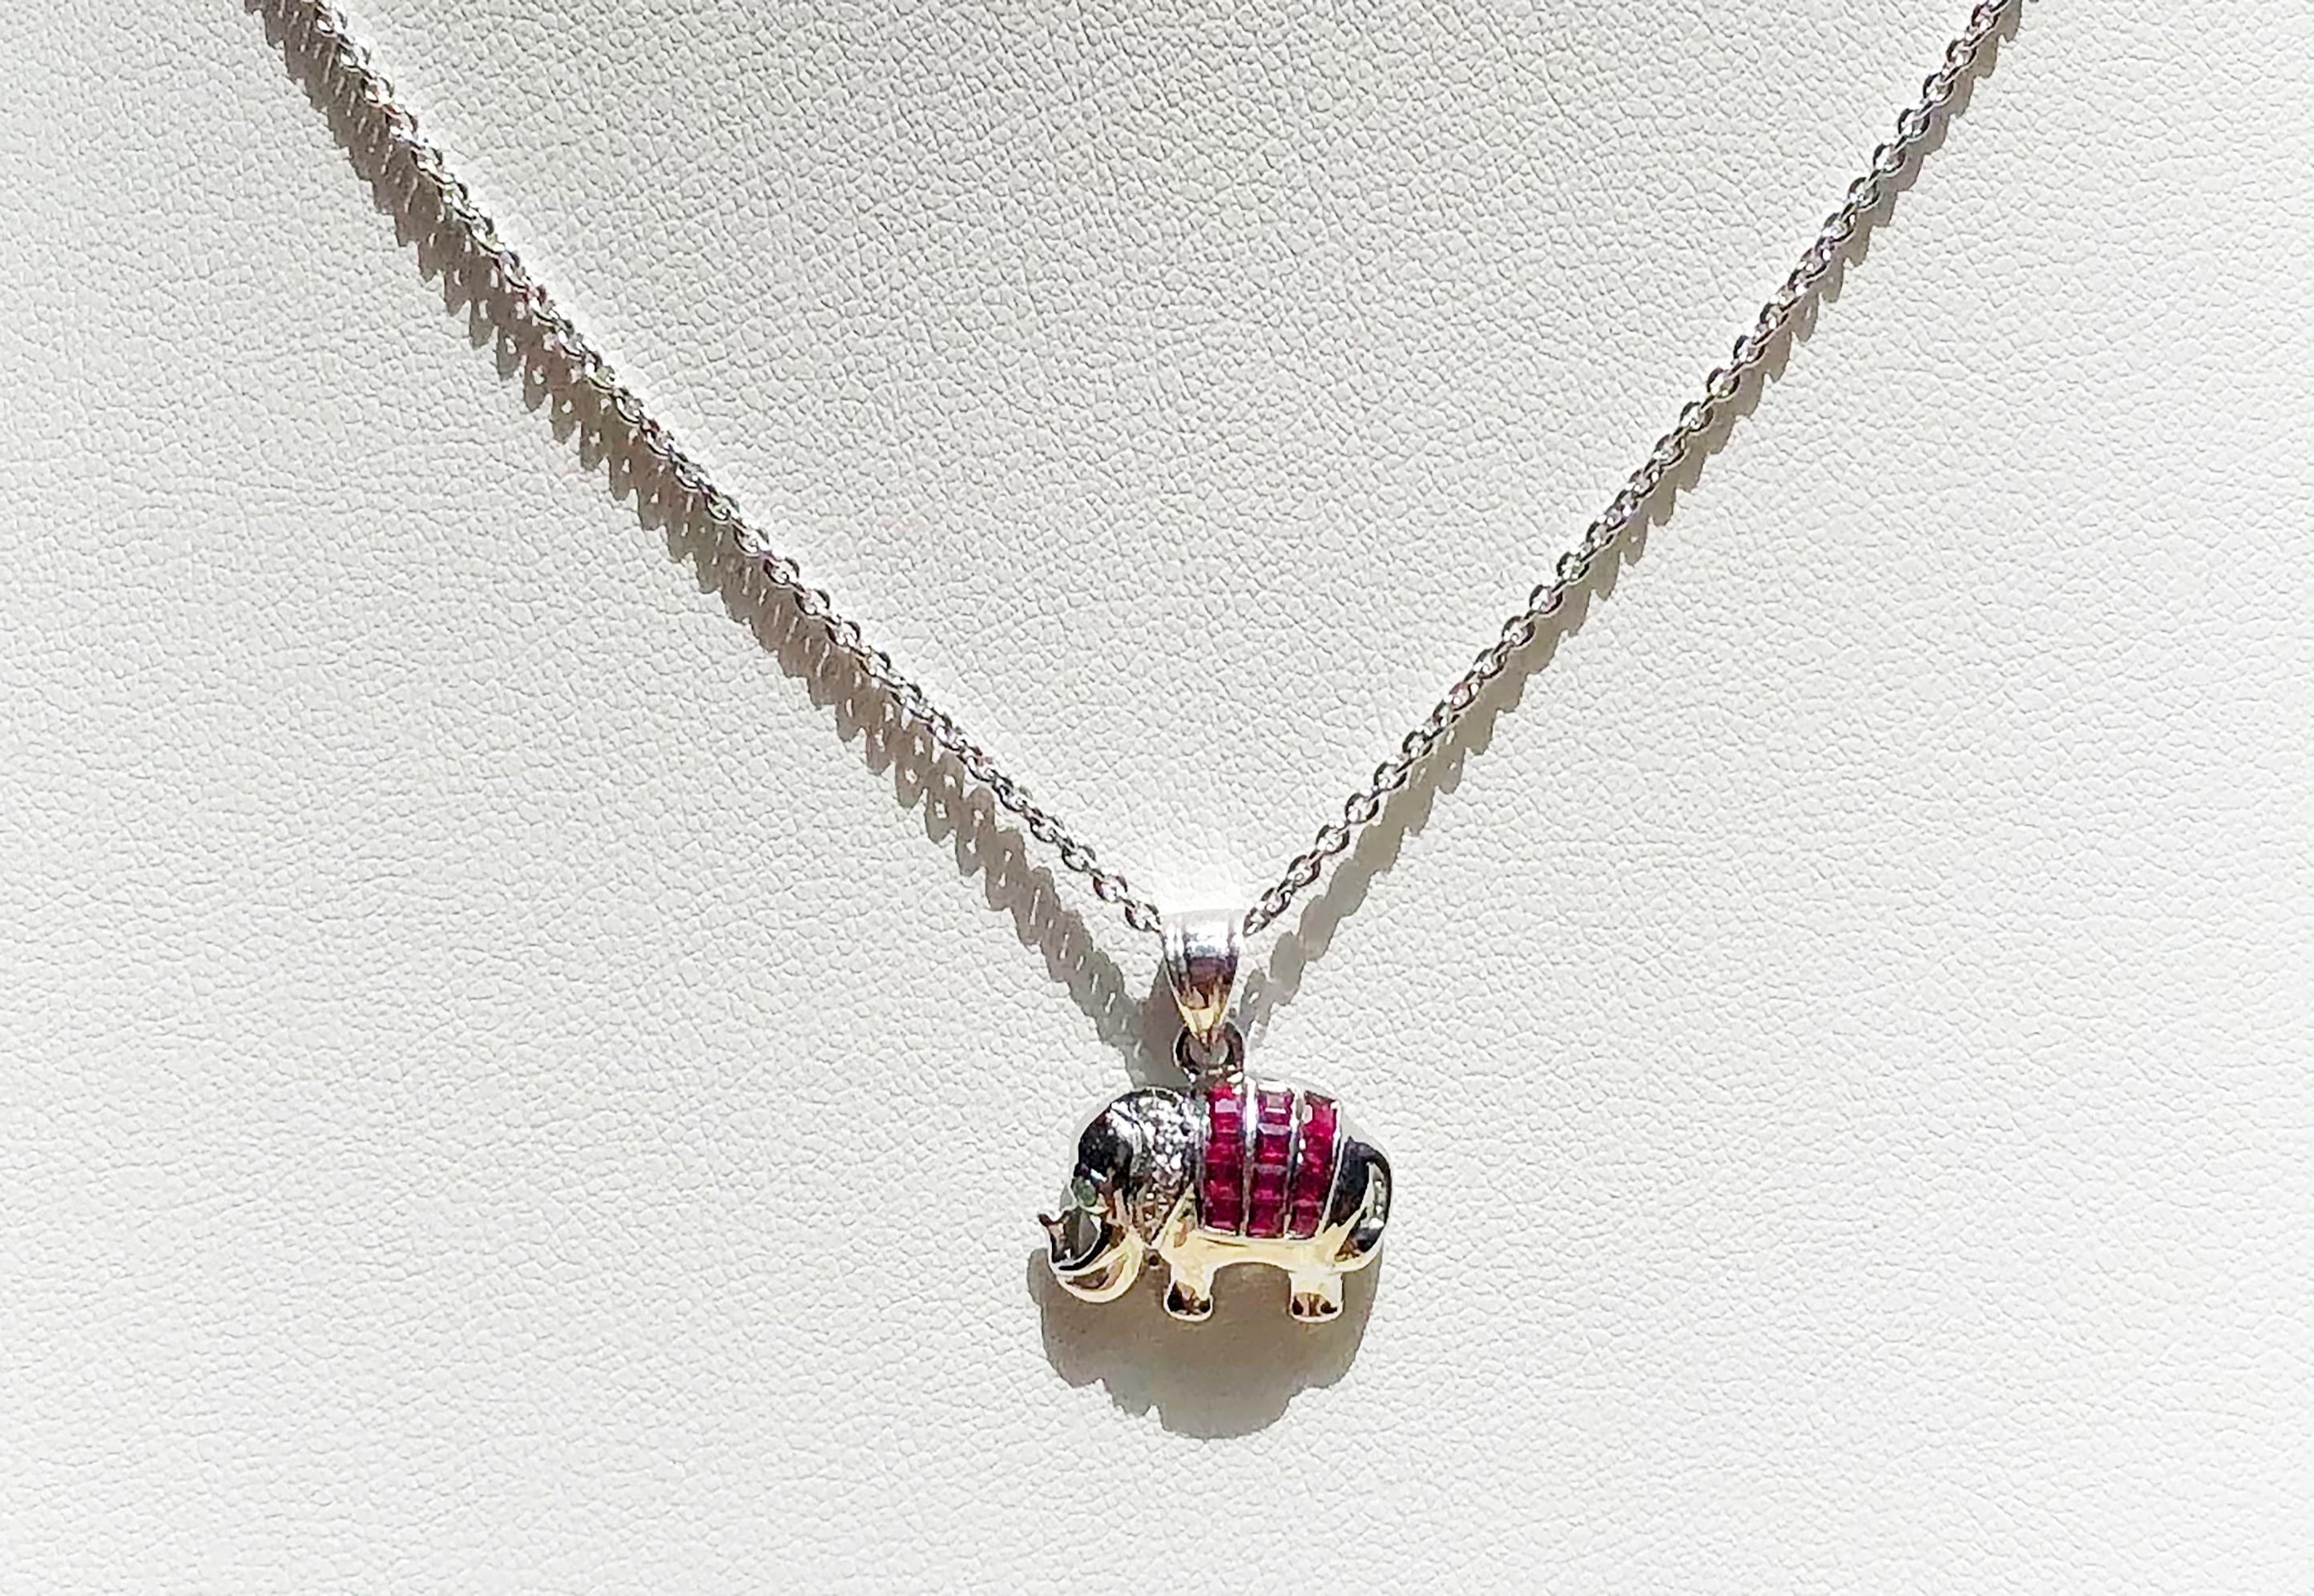 Ruby 0.42 carat with Diamond 0.02 carat Elephant pendant set in 18 Karat White Gold Settings
(chain not included)

Width:  1.7 cm 
Length: 1.8 cm
Total Weight: 2.35 grams

